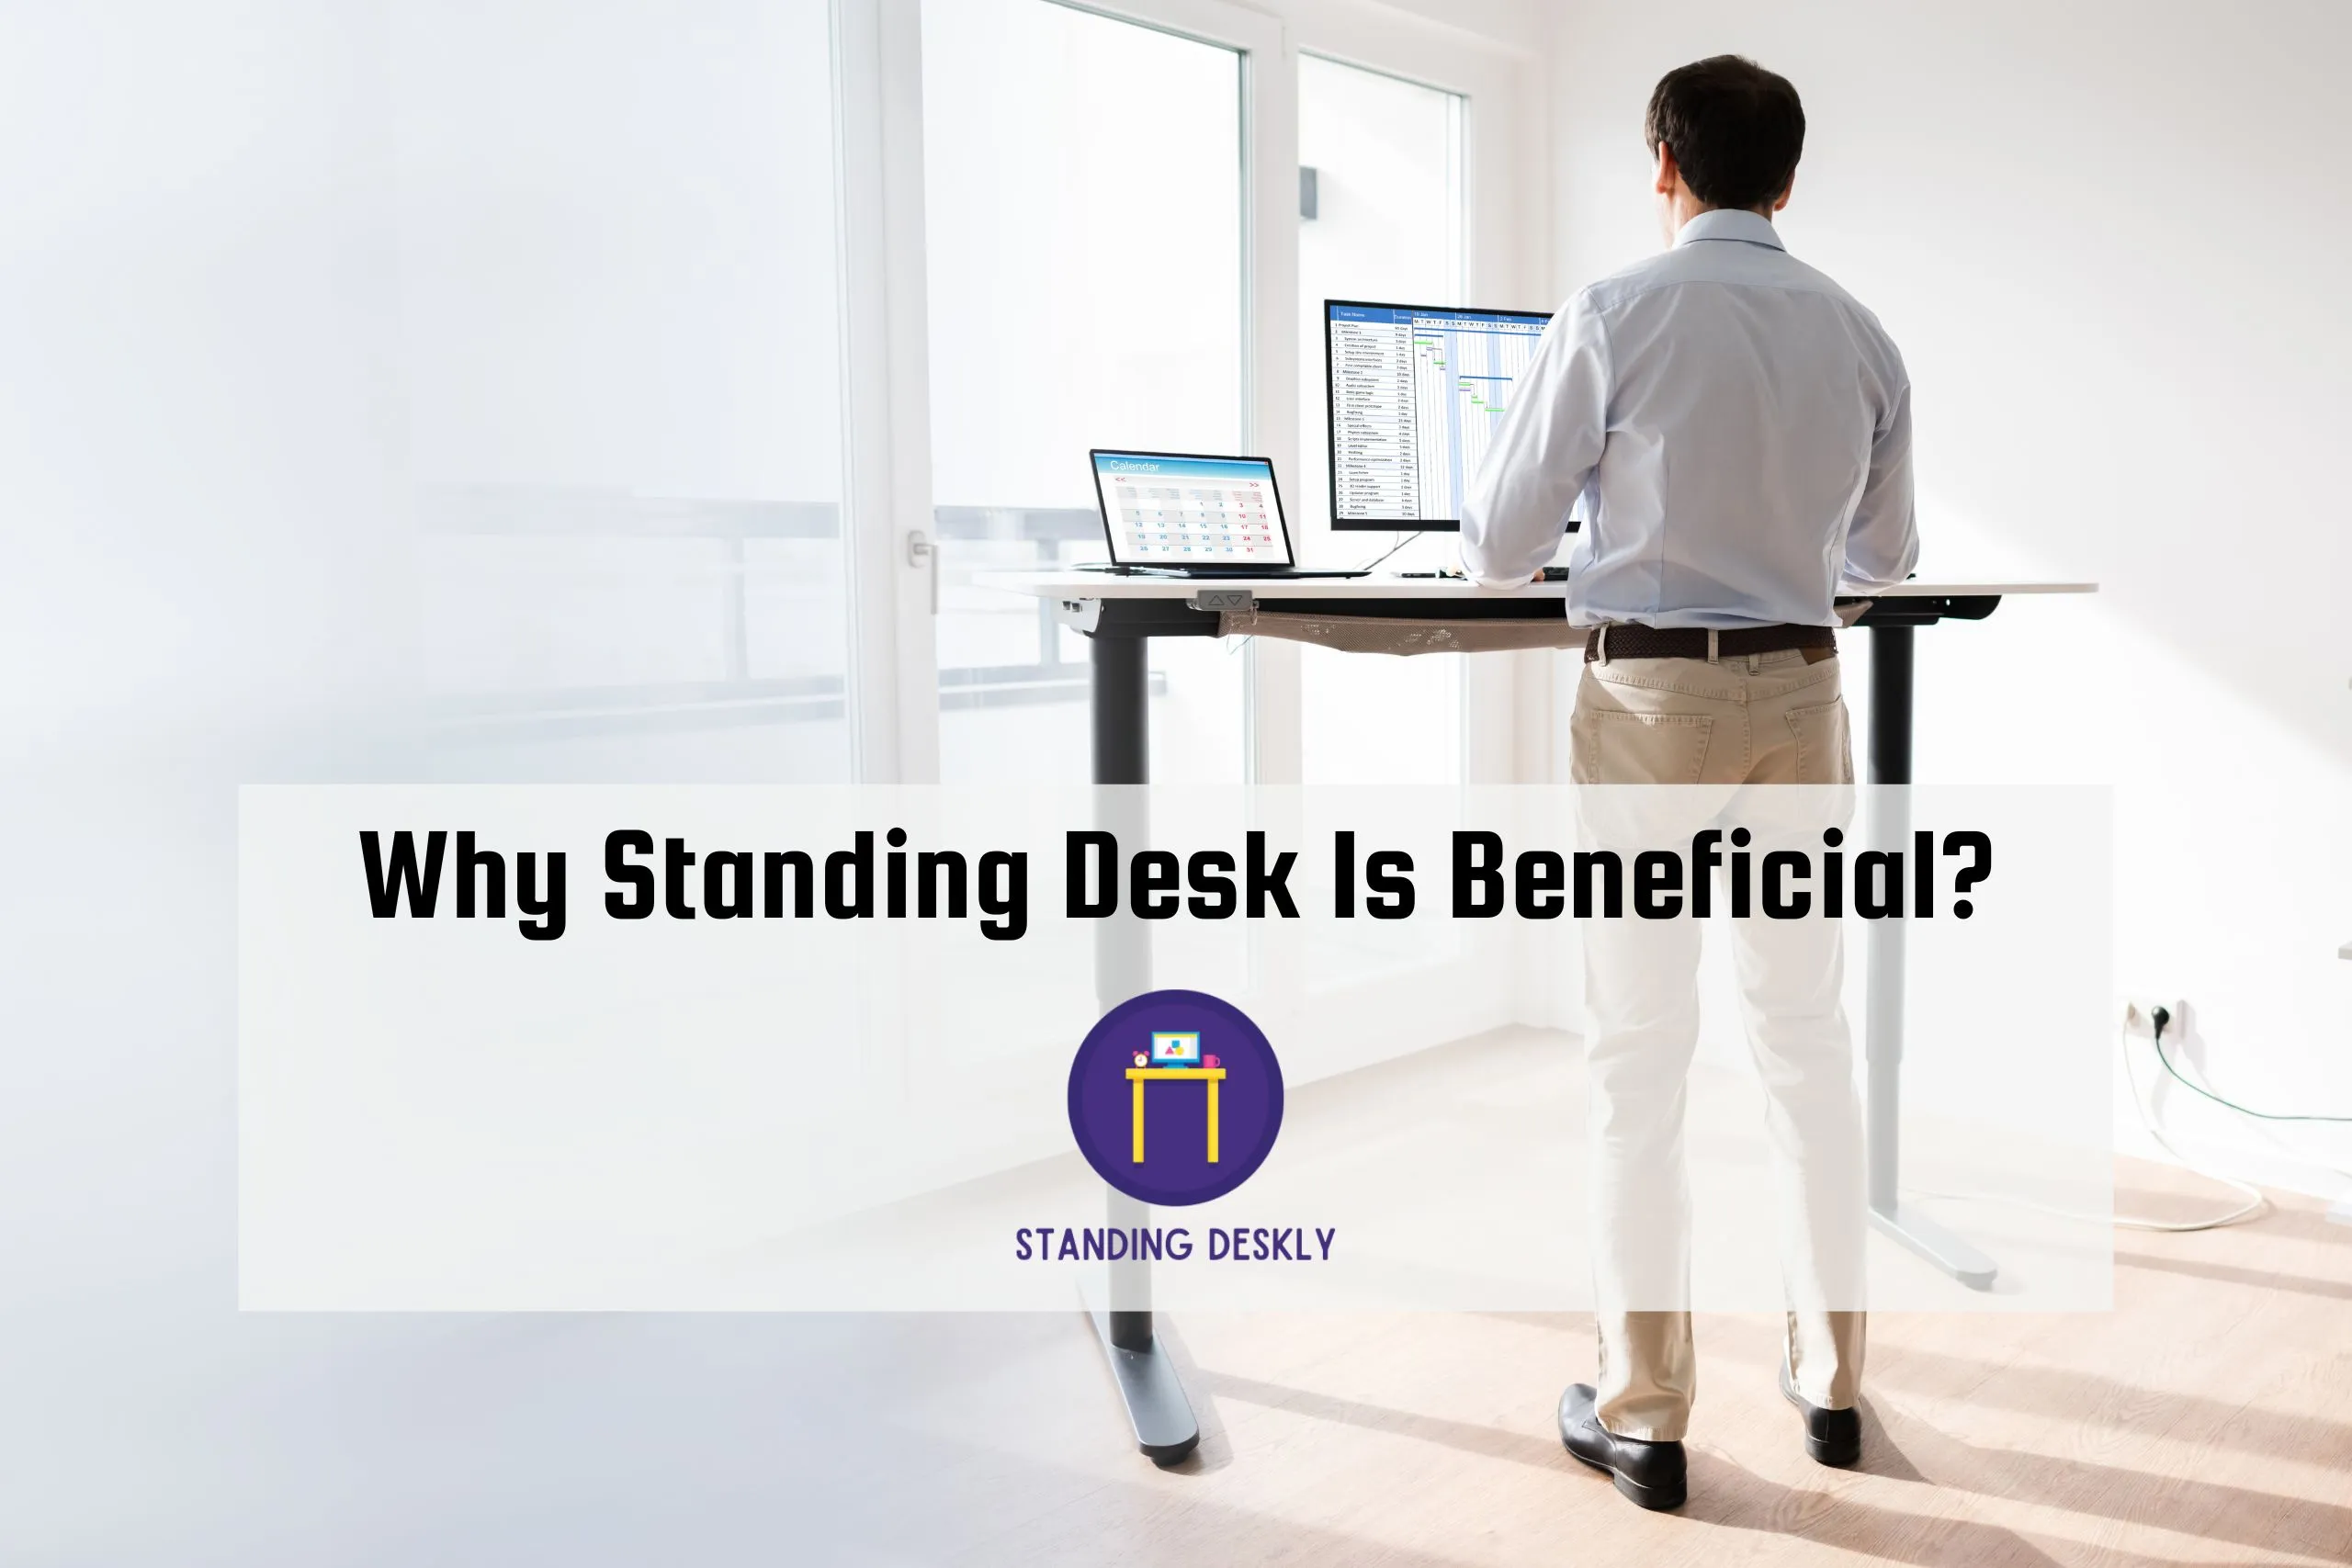 Why Standing Desk Is Beneficial